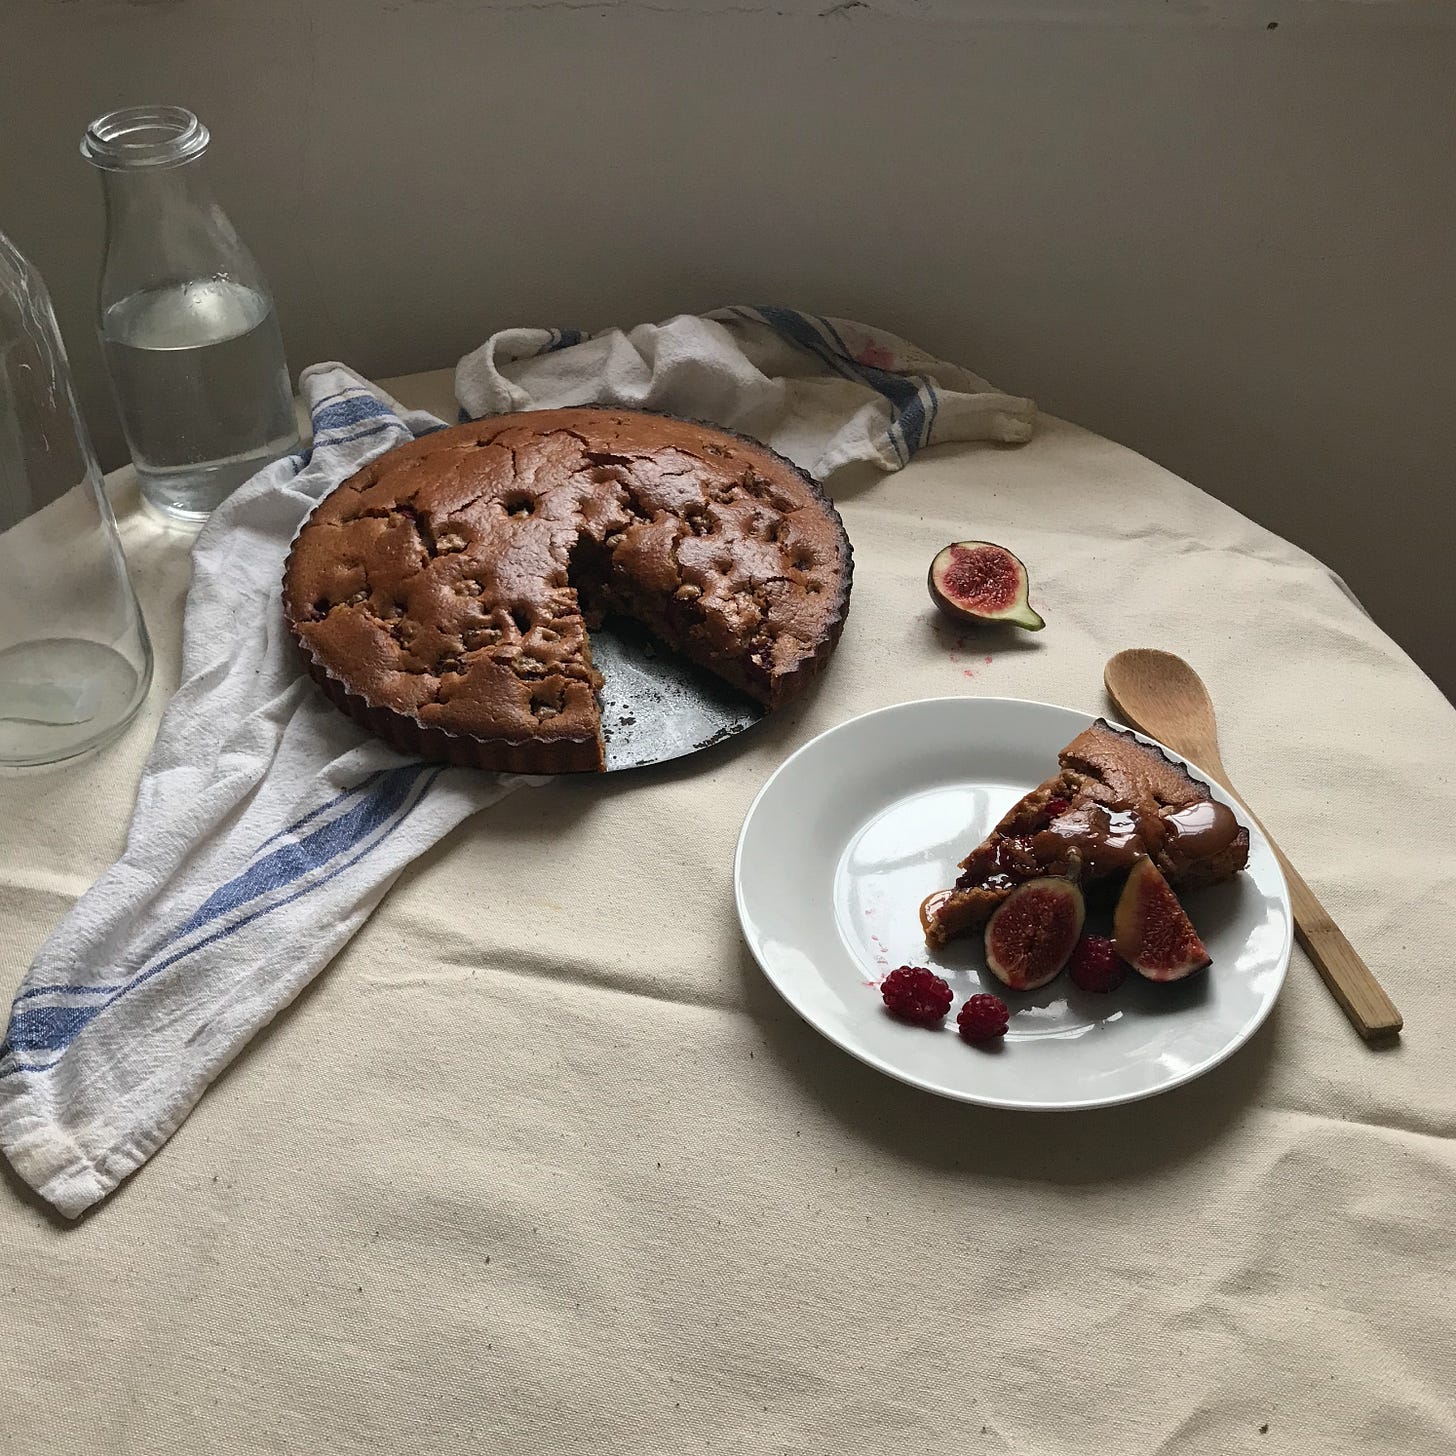 A brown cake still in its tin, on a napkin on a table. The cake has dimples where soft raspberries have cooked into its top. A big segment has been sliced out and arranged on a white plate beside, some cut figs on the plate, one half open on the table. A wooden spoon, and two carafe of water are arranged beside. 